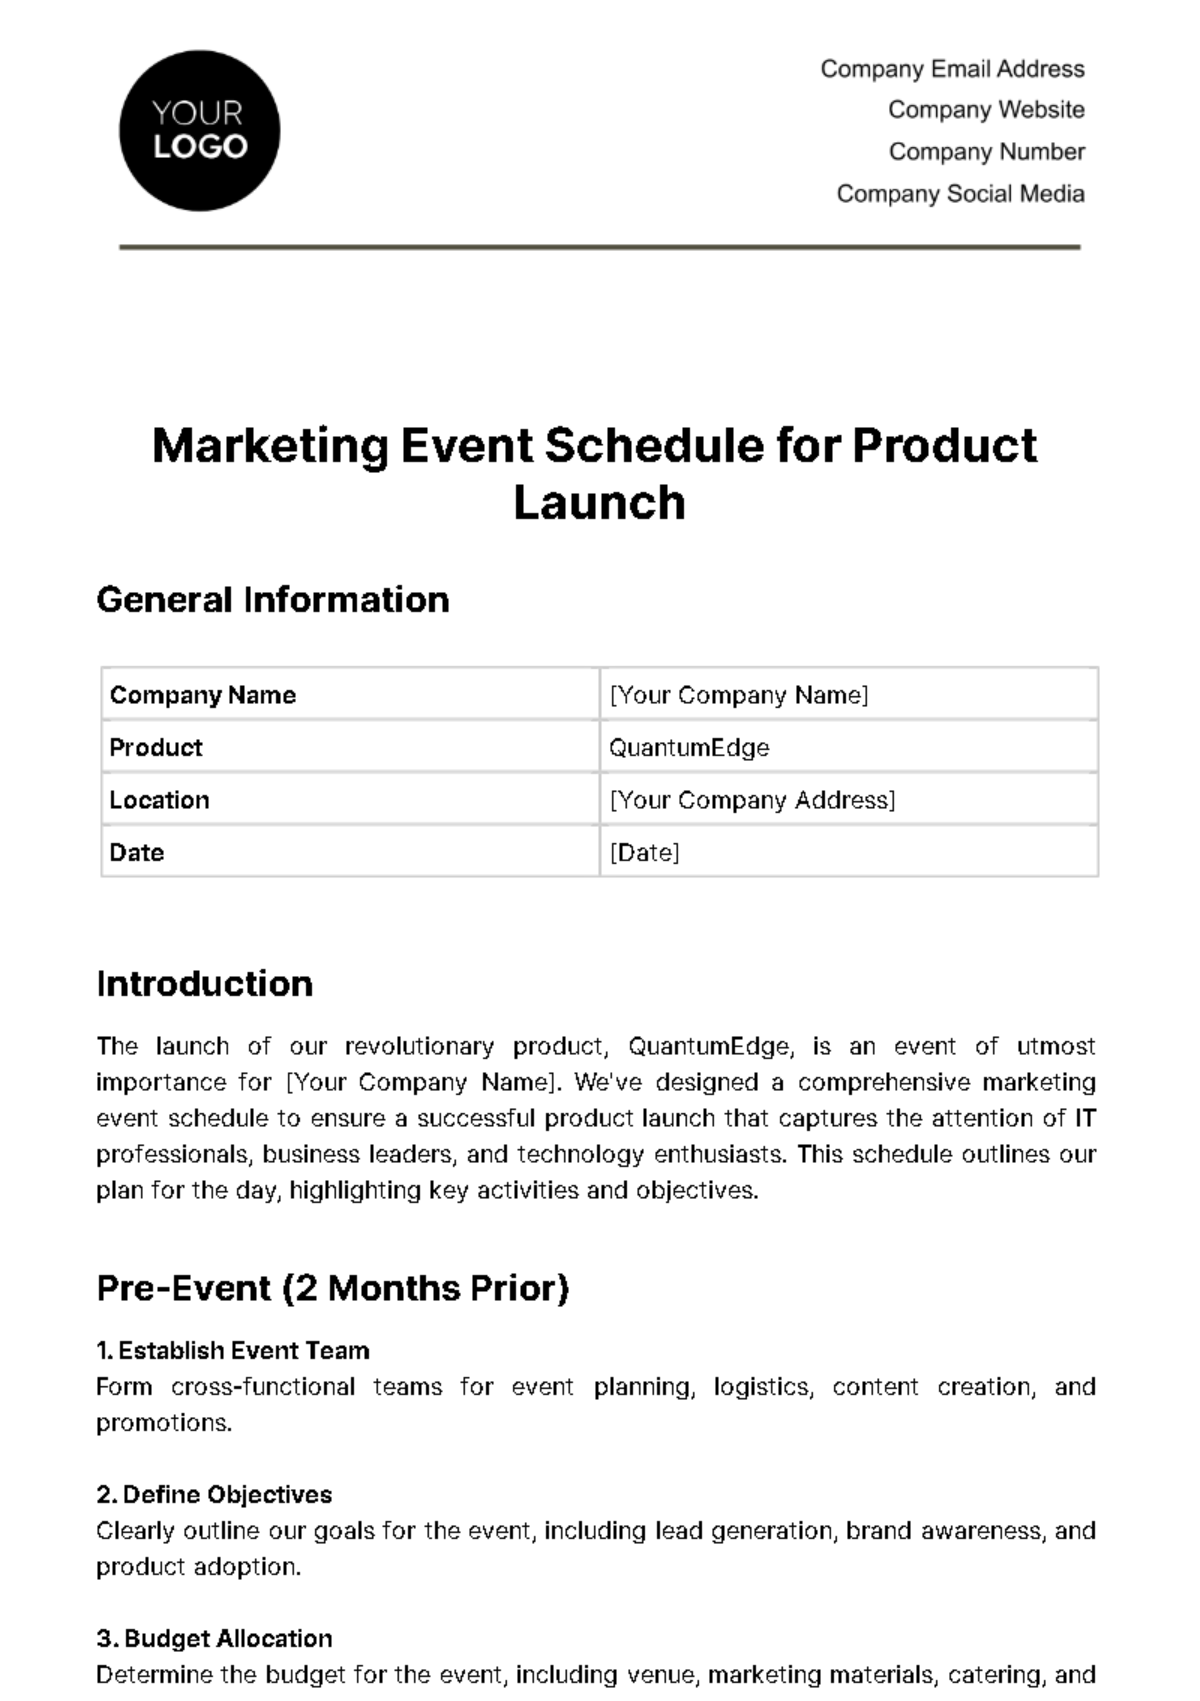 Free Marketing Event Schedule for Product Launch Template